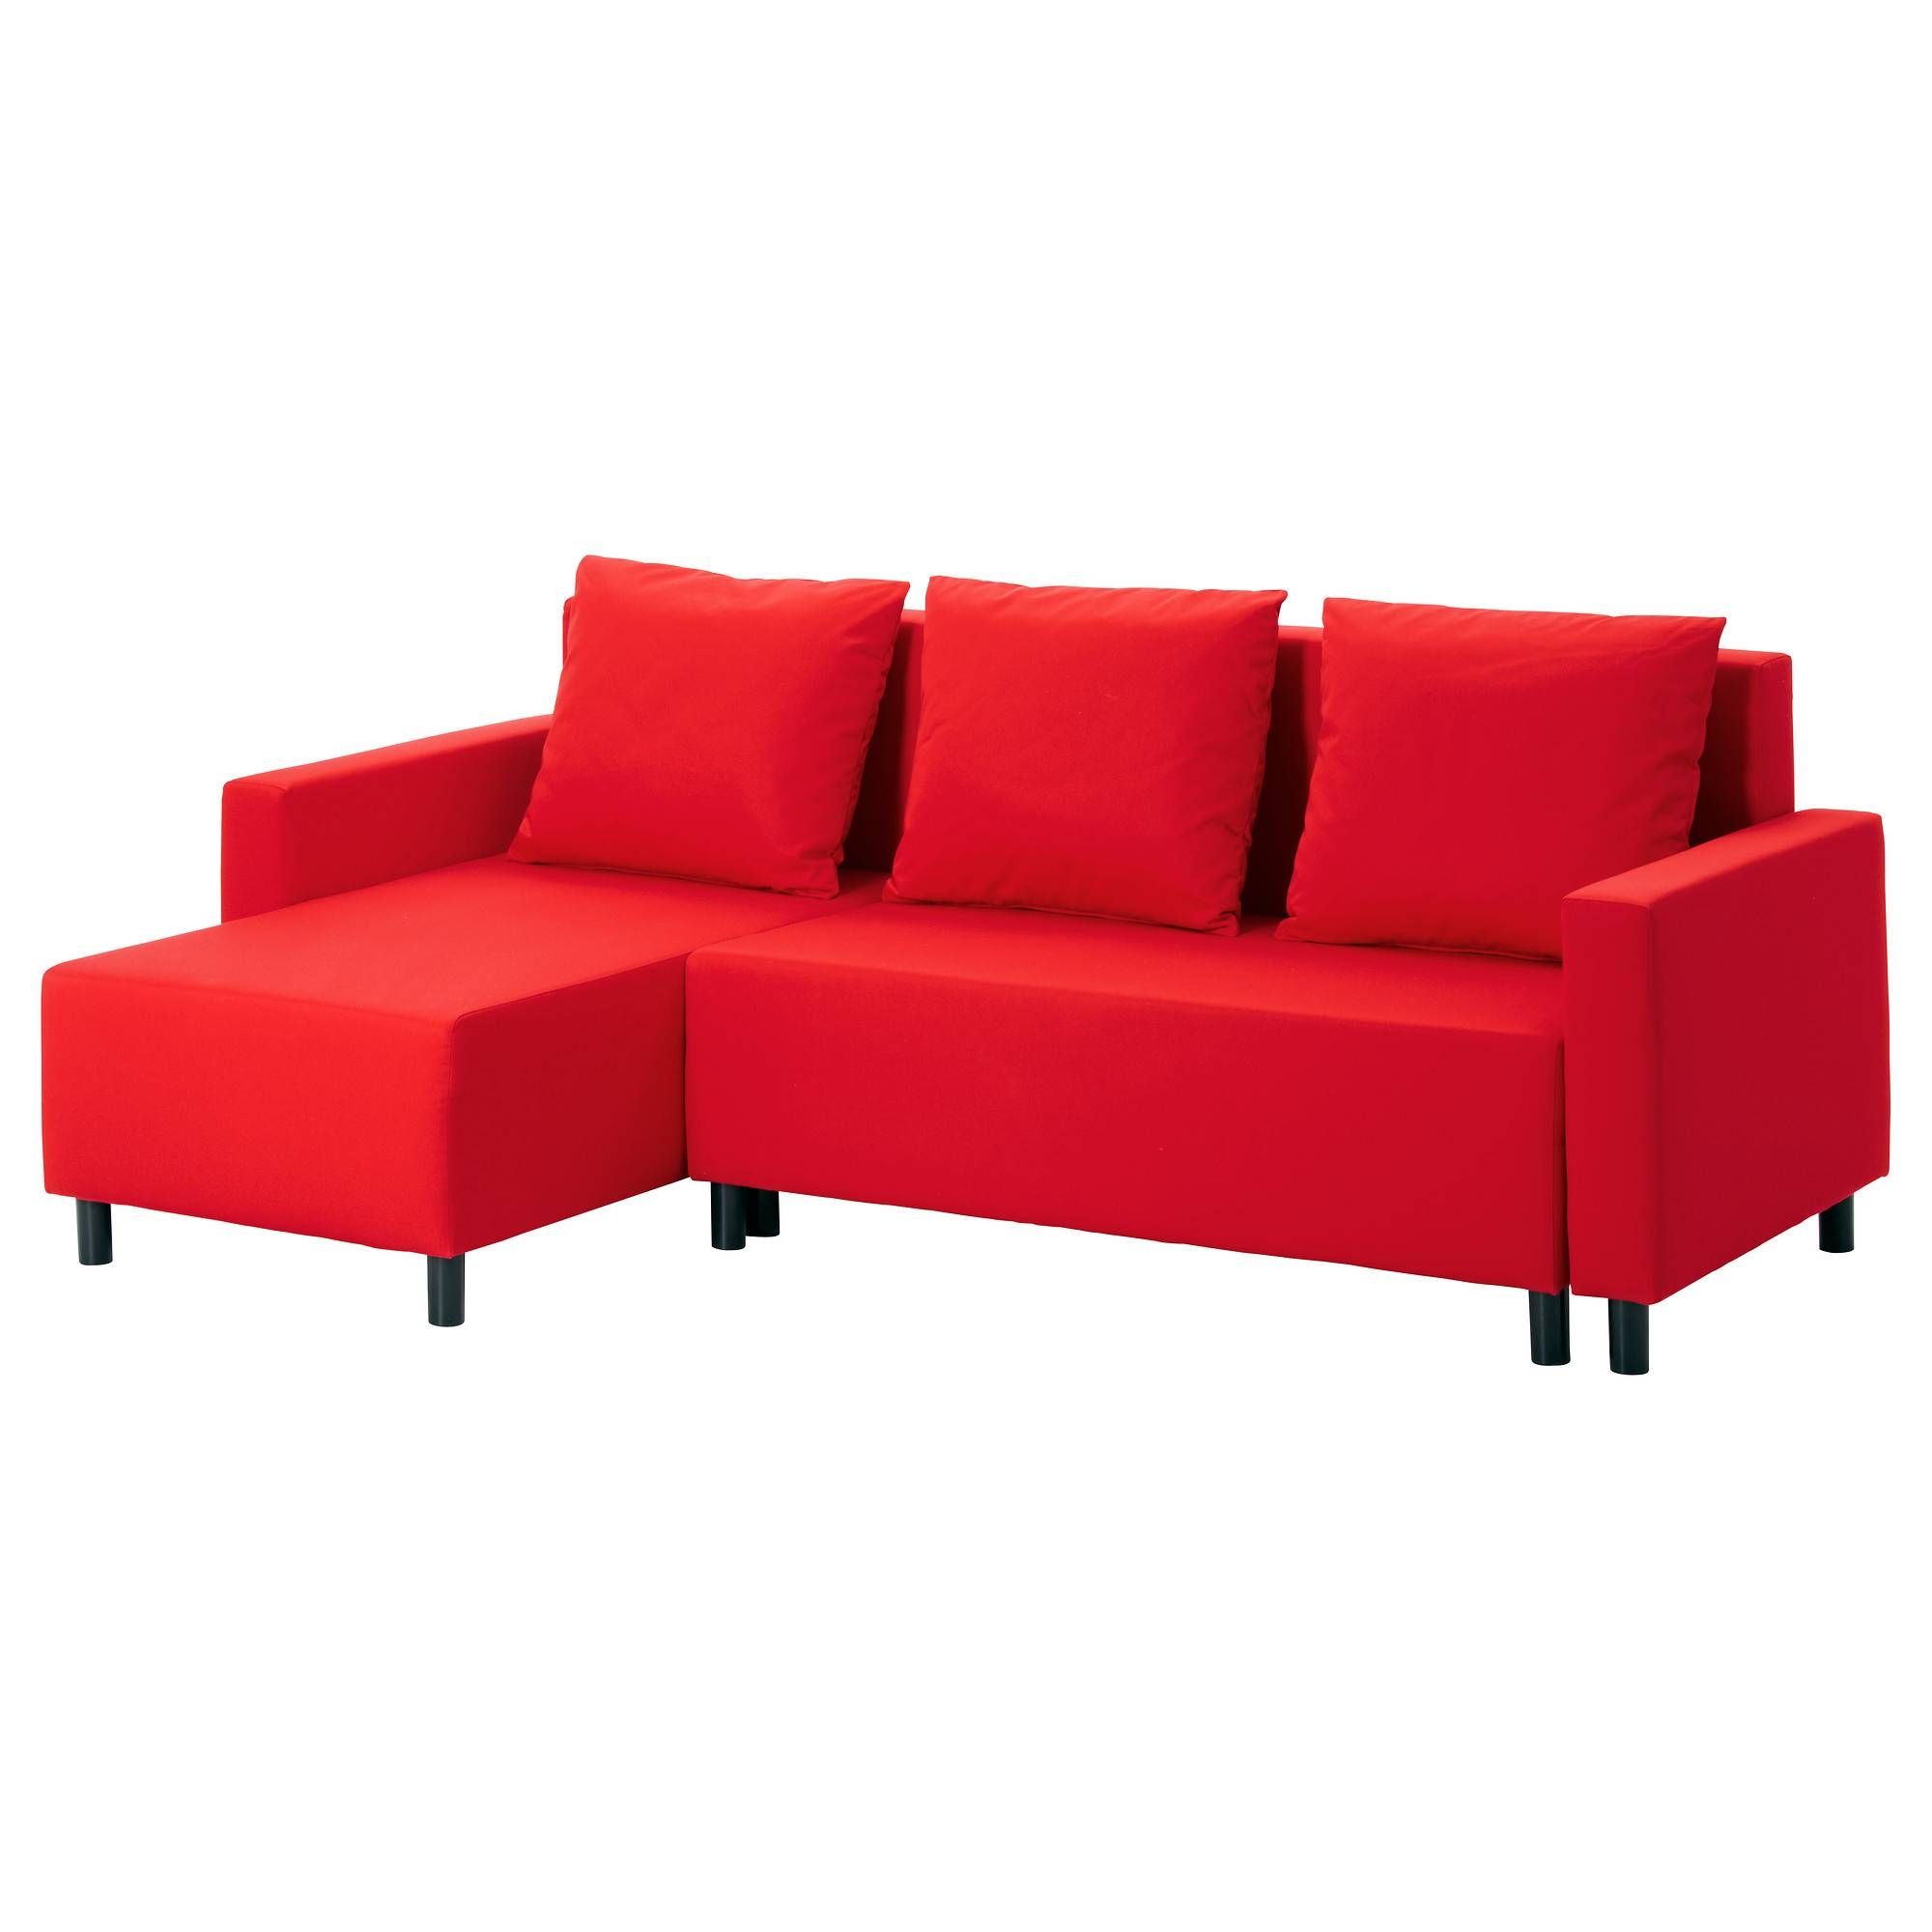 Lugnvik Sofa Bed With Chaise Longue Tallåsen Red – Ikea Within Red Sofa Beds Ikea (Photo 9 of 30)